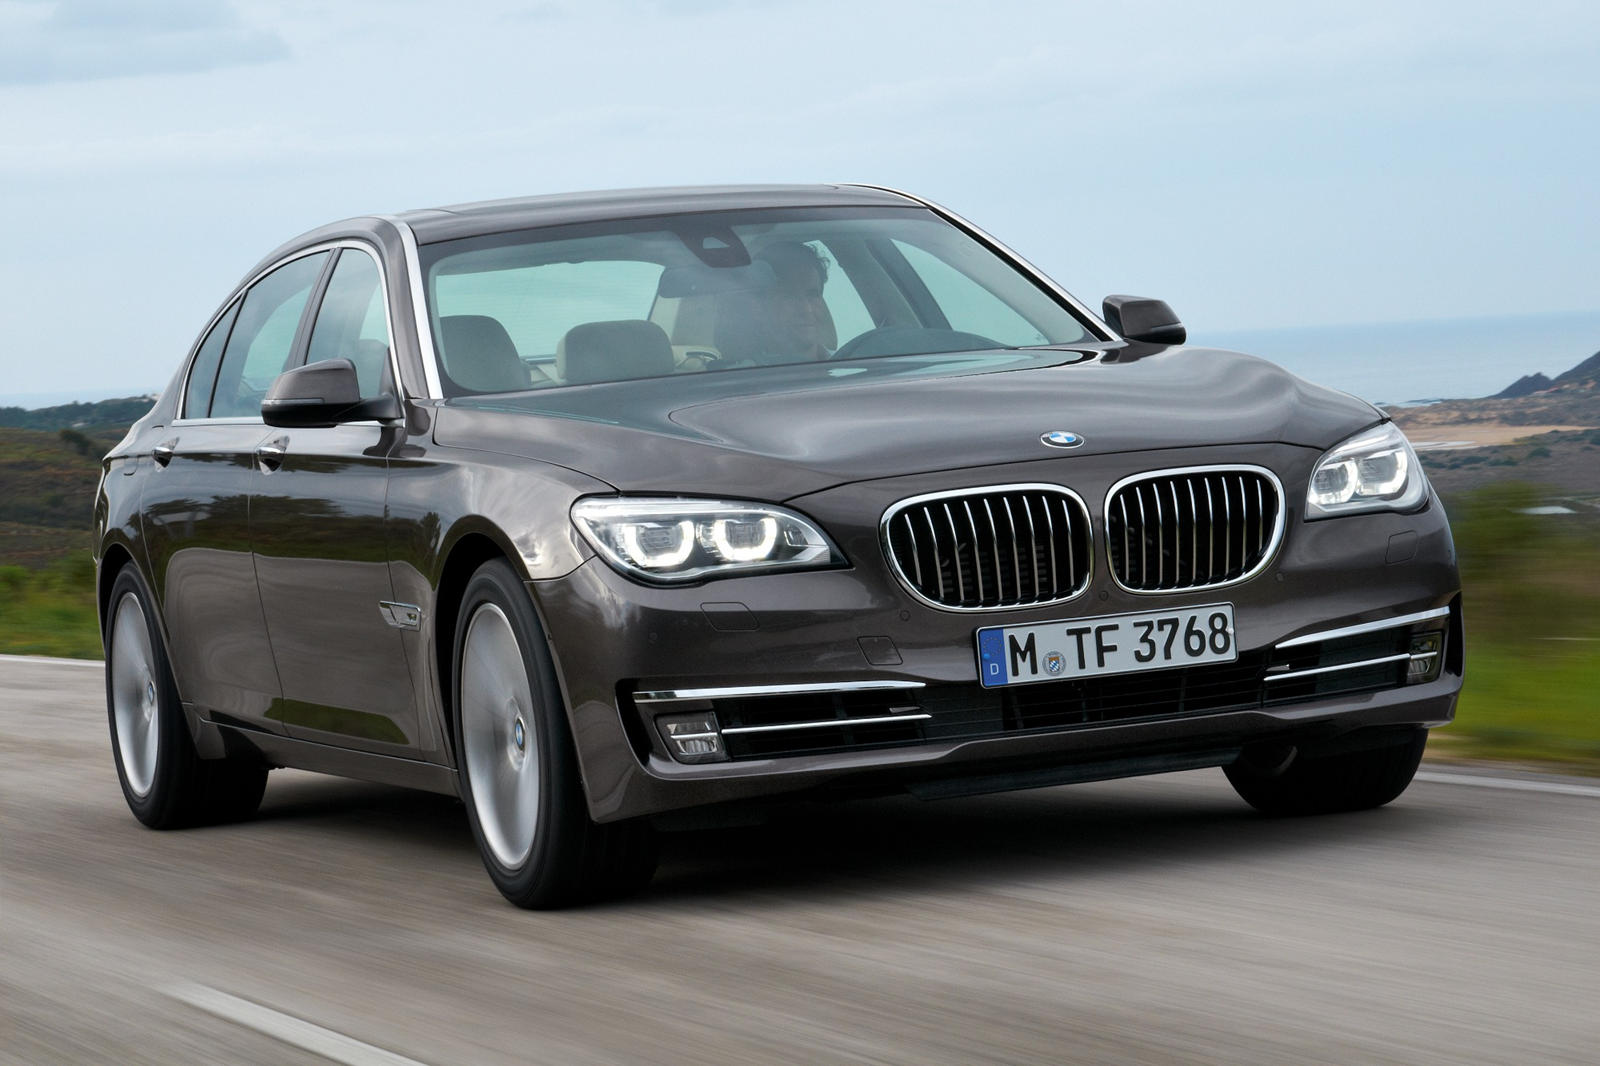 Intolerable broadcast Pull out 2015 BMW 7 Series Interior Photos | CarBuzz